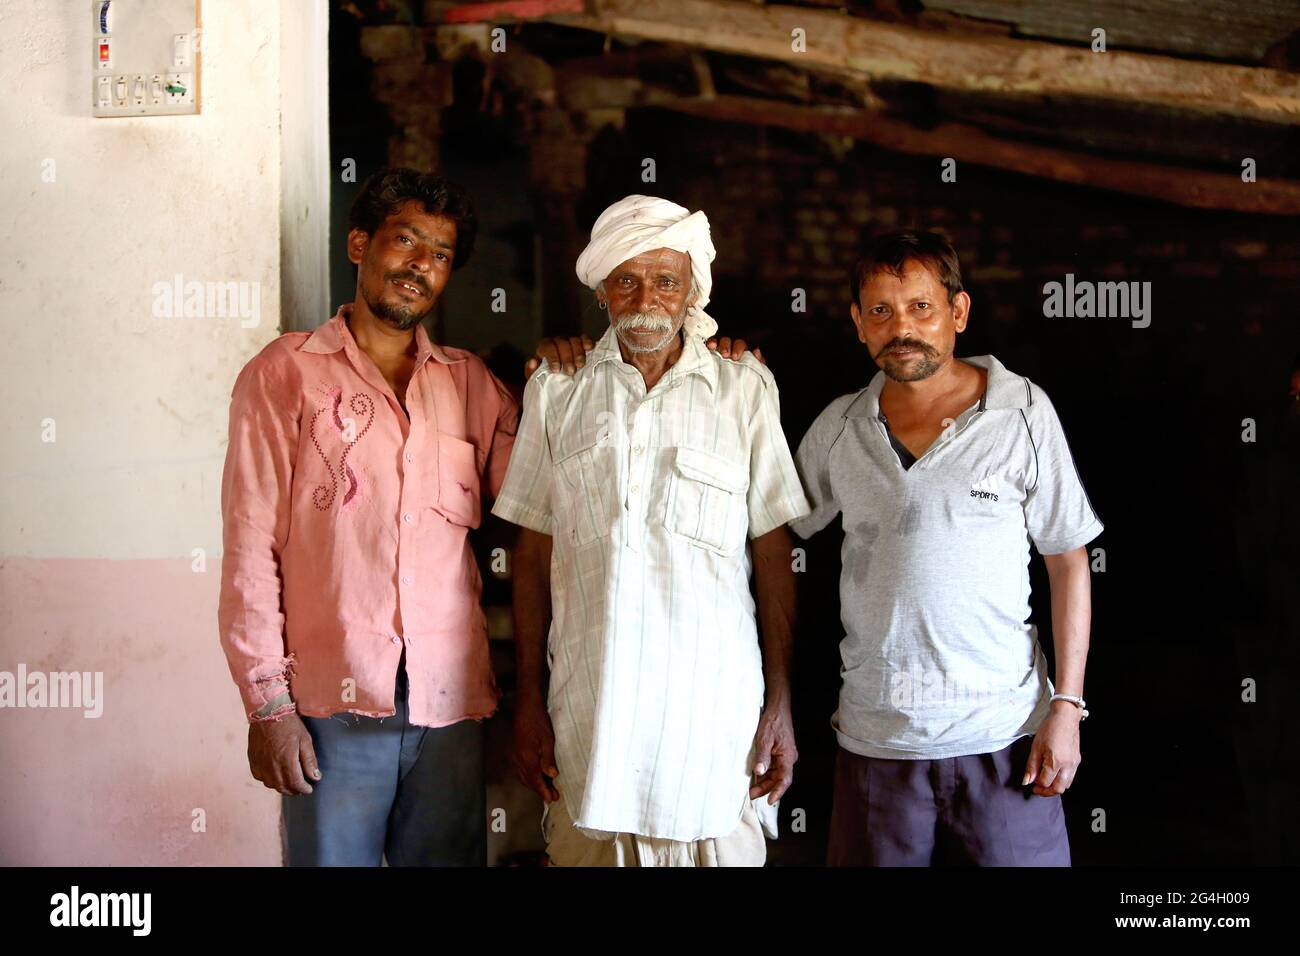 RATHAWA TRIBE - Tribal old man with his sons. This picture was clicked in Maraja village of Gujarat, India Stock Photo